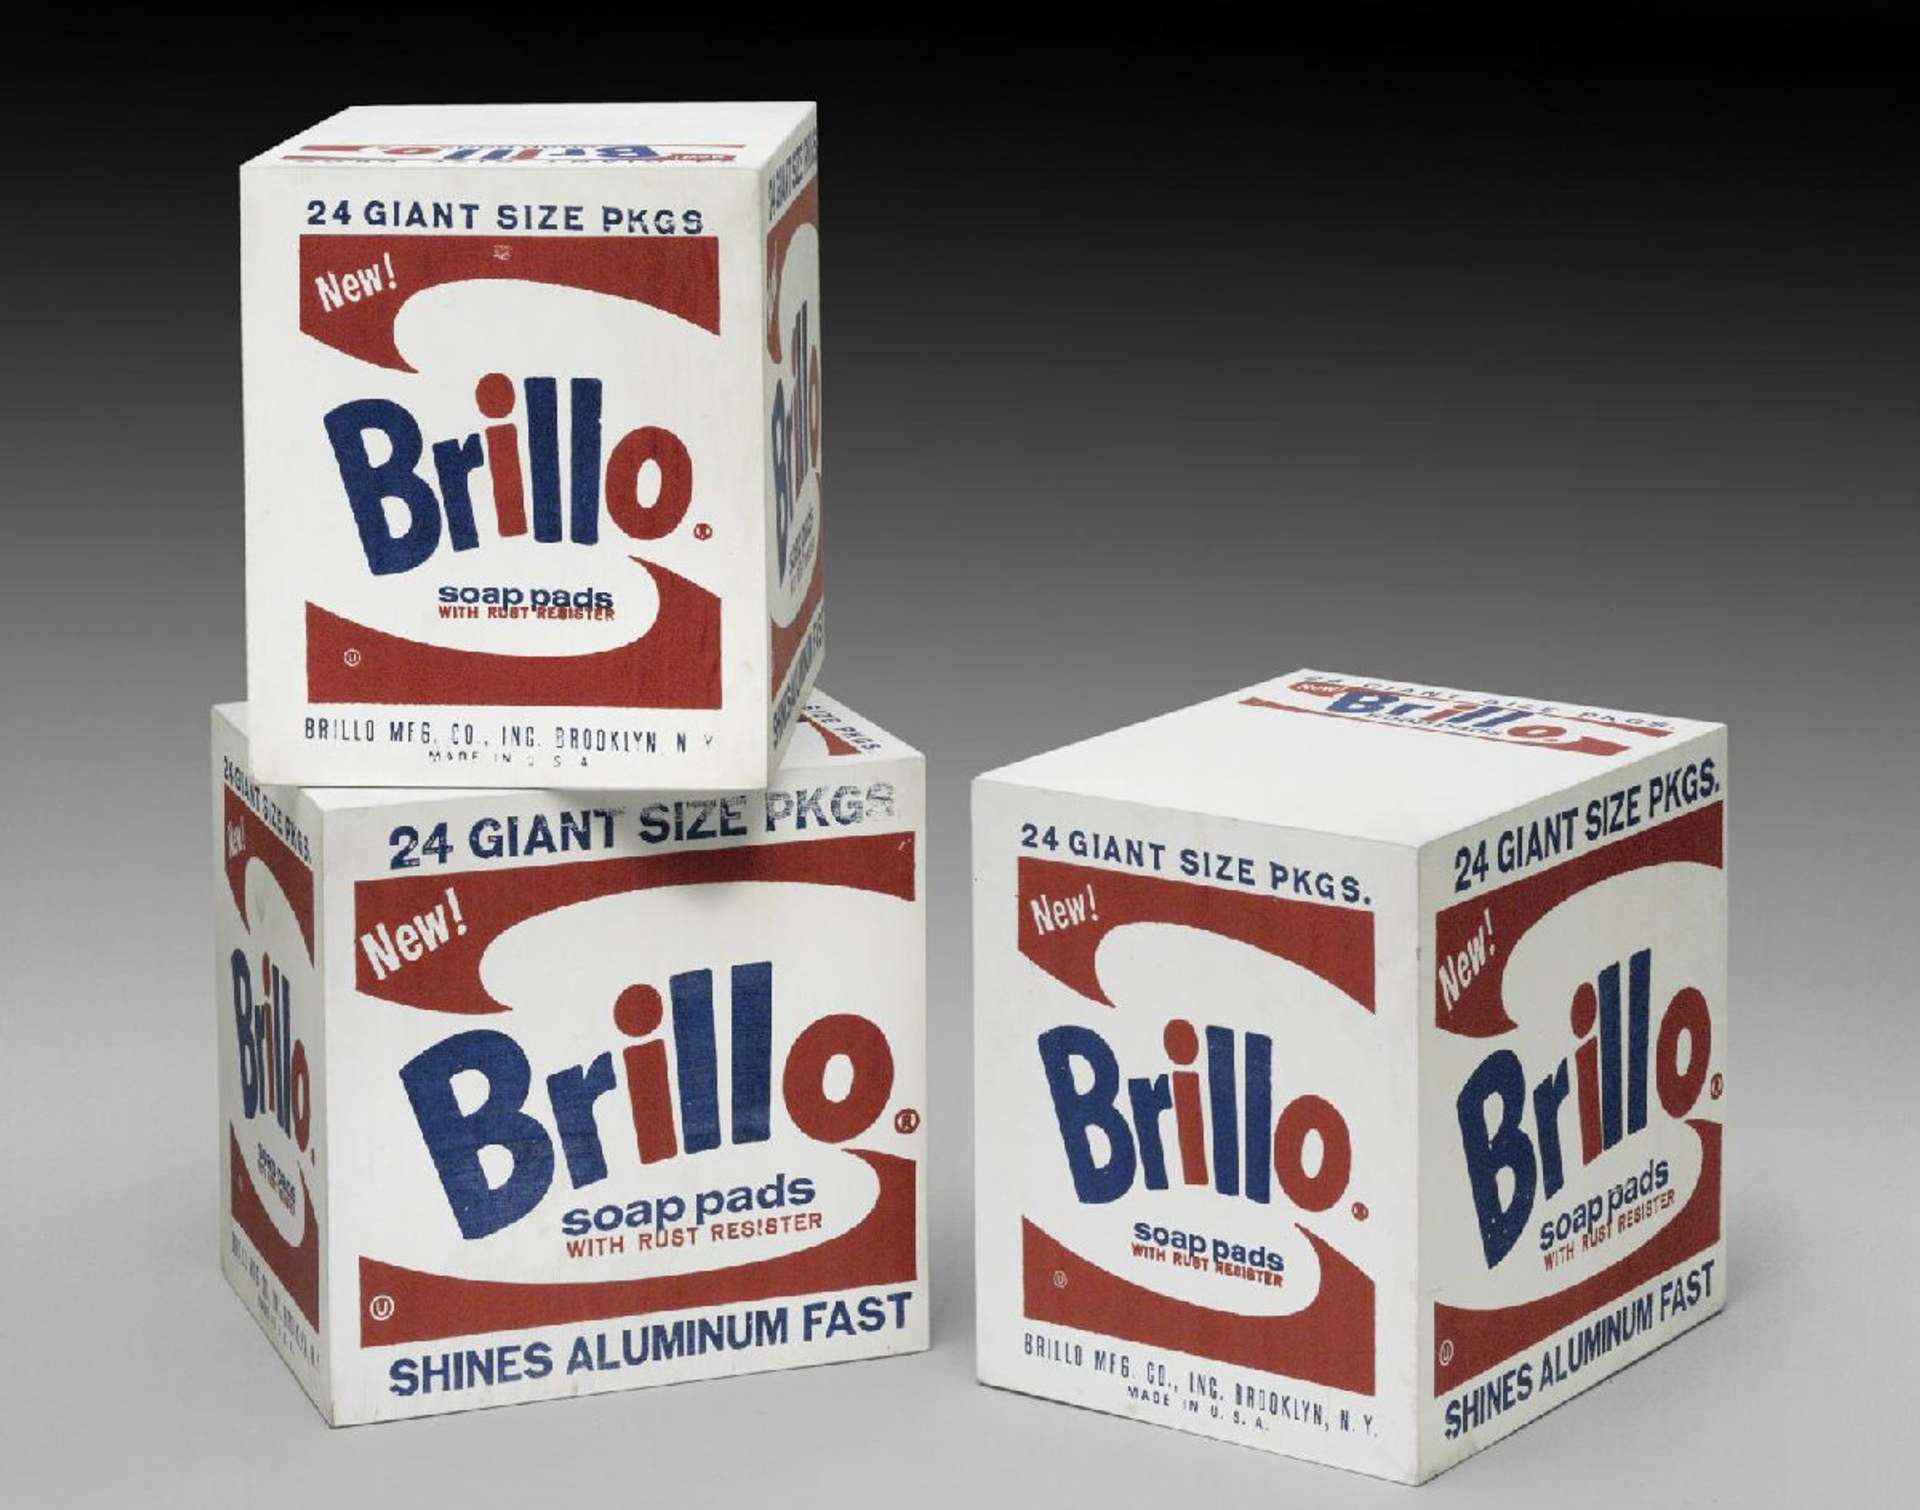 An image of the Brillo Boxes installation by Andy Warhol, featuring three boxes of Brillo soap pads.